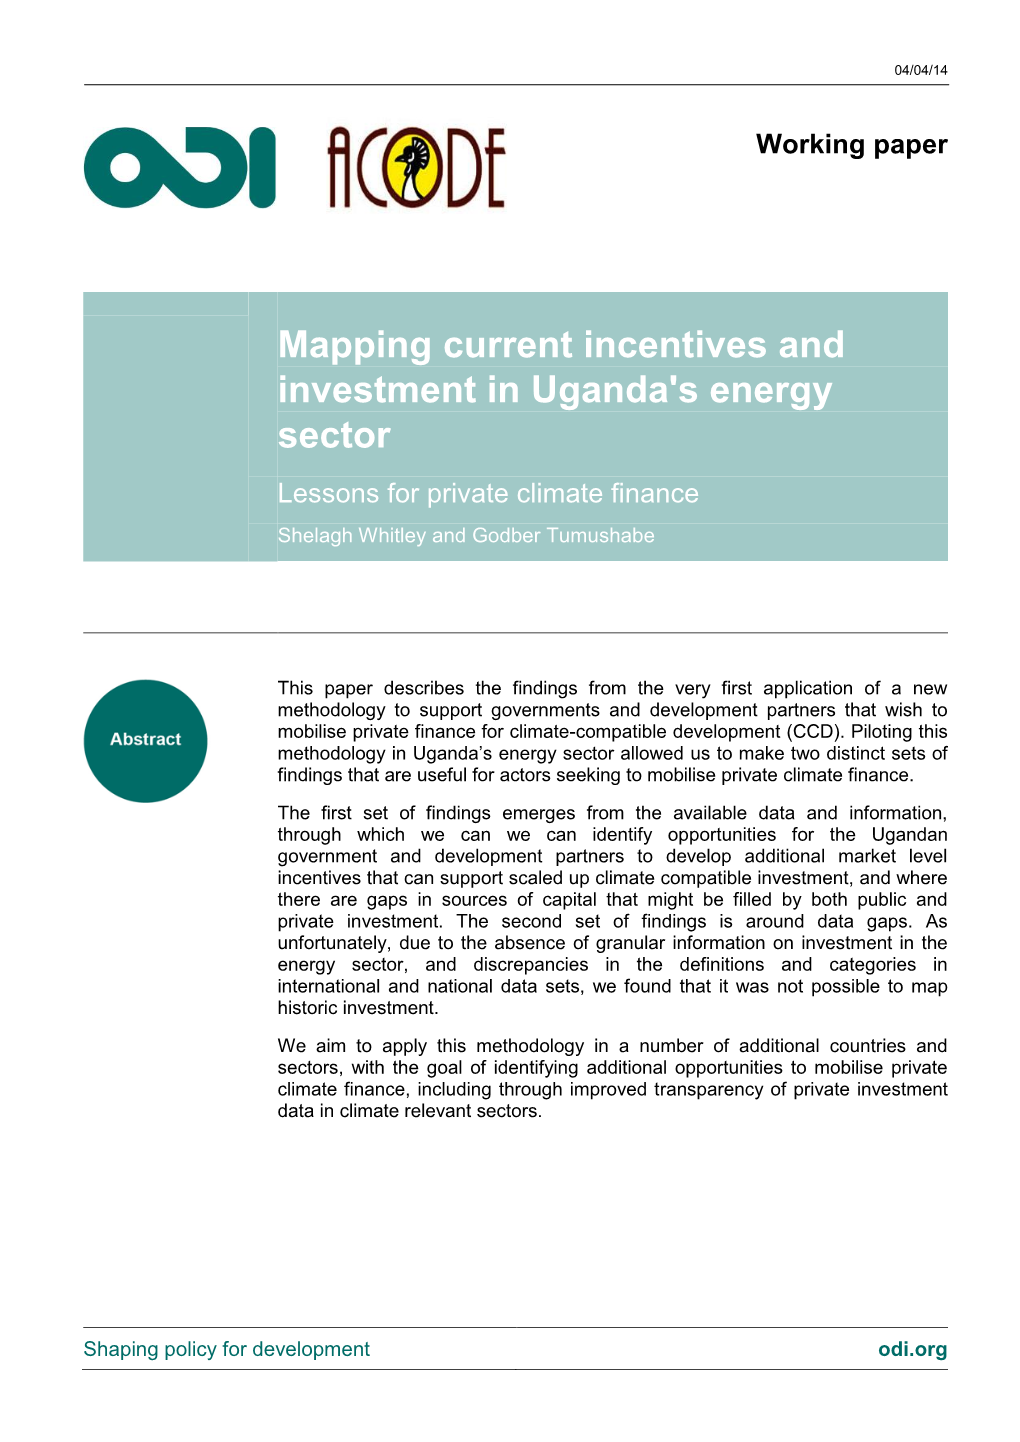 Mapping Current Incentives and Investment in Uganda's Energy Sector Lessons for Private Climate Finance Shelagh Whitley and Godber Tumushabe